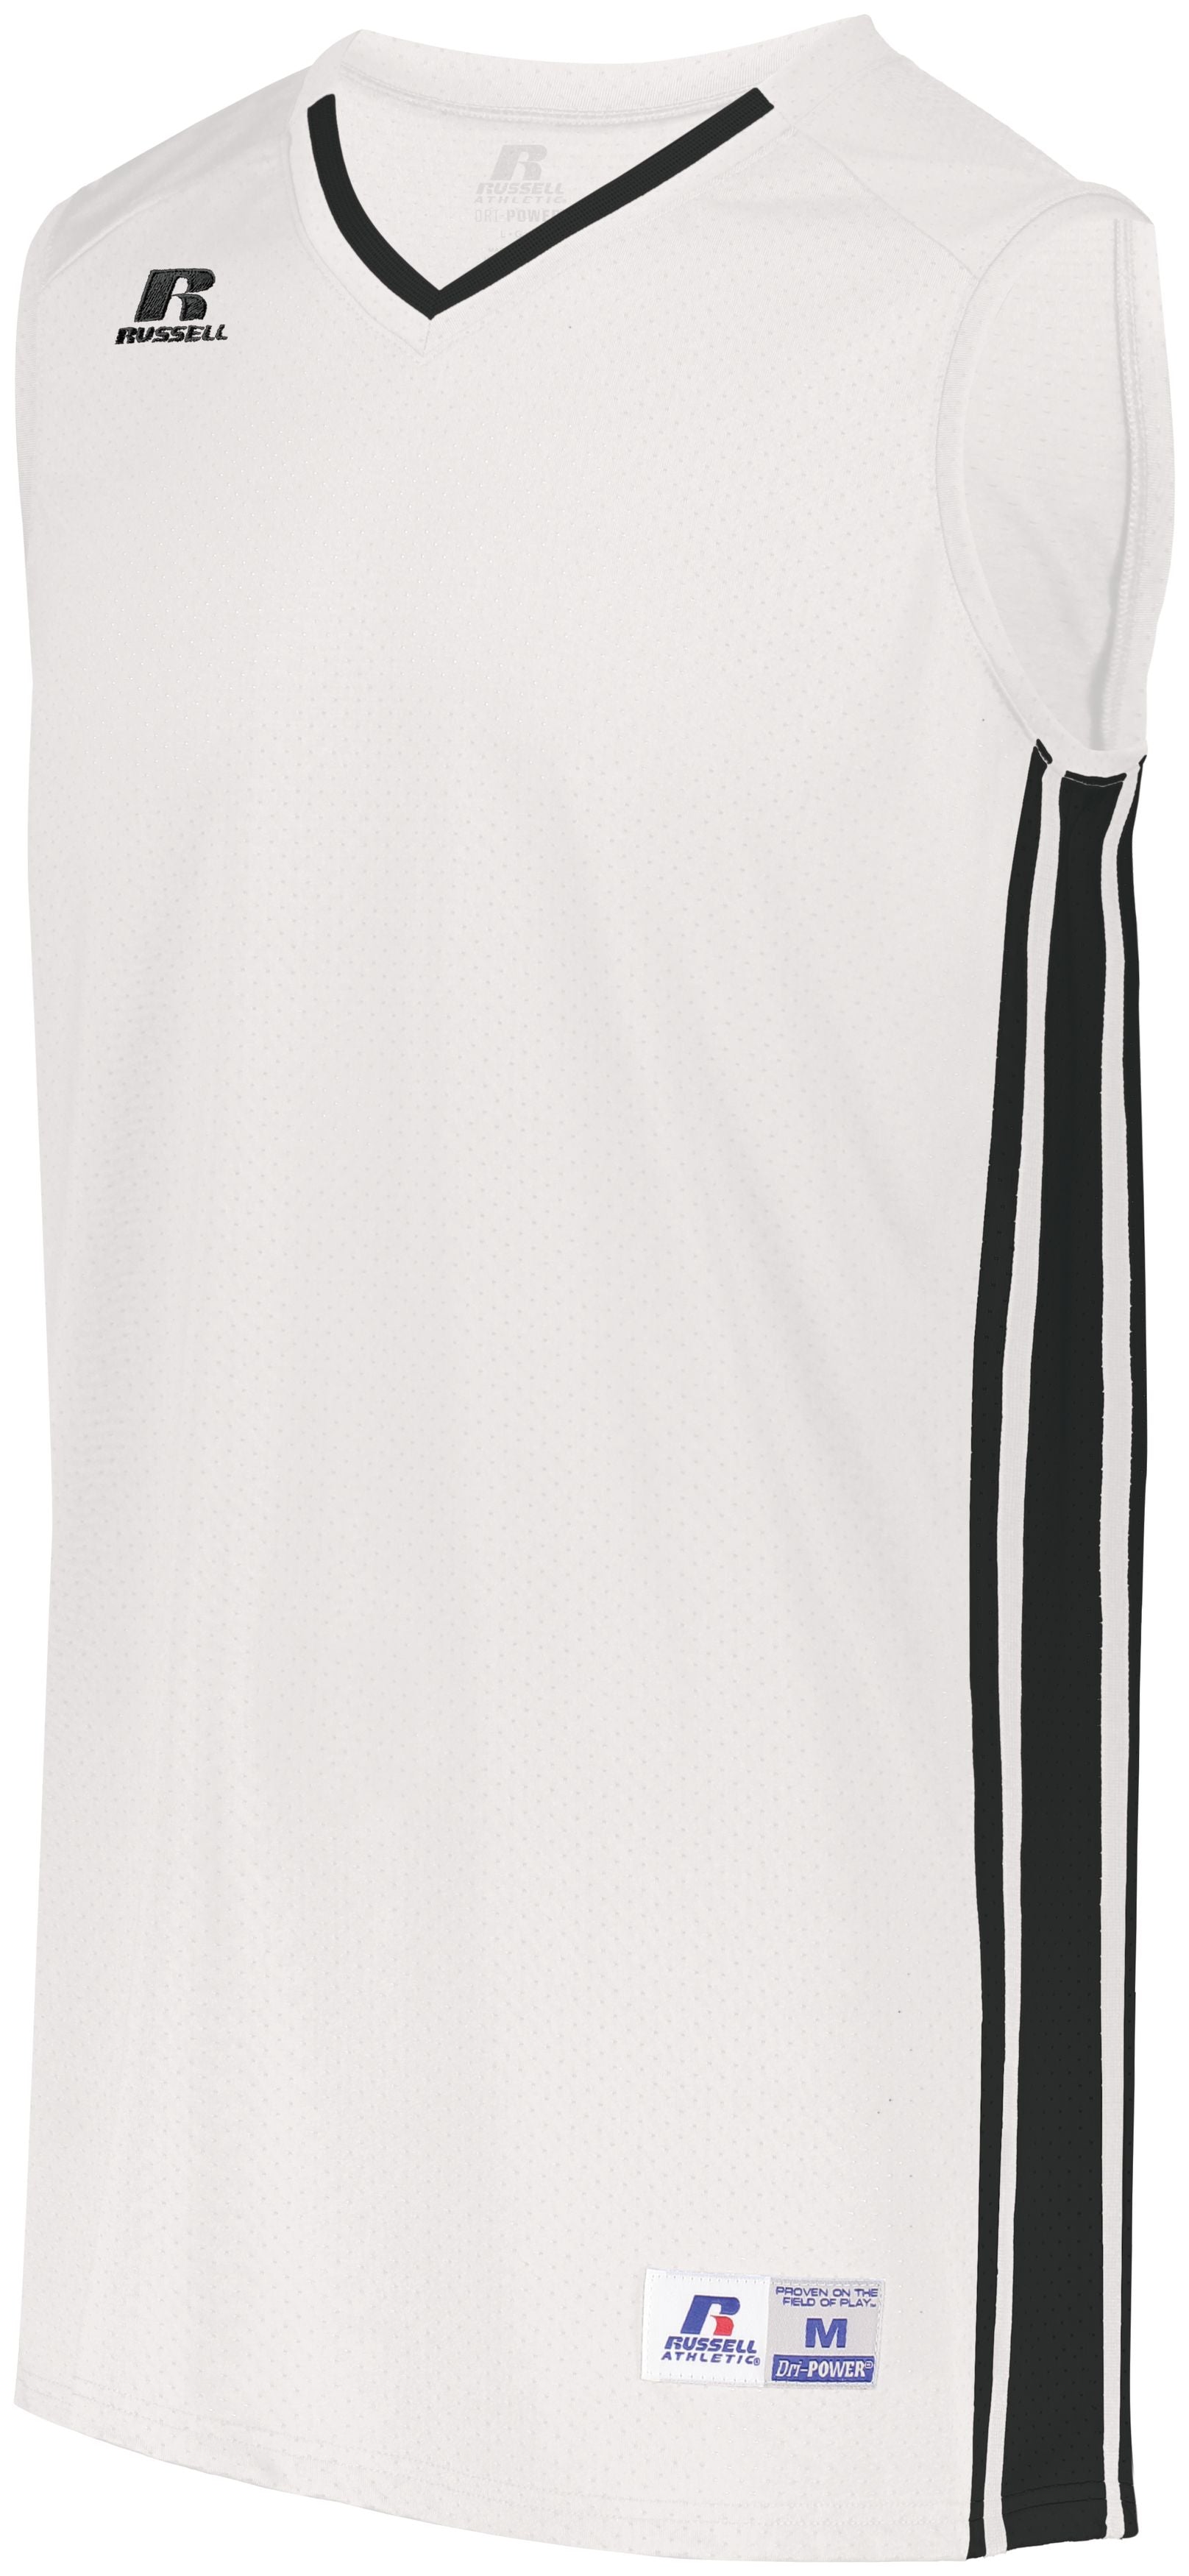 Russell Athletic Legacy Basketball Jersey in White/Black  -Part of the Adult, Adult-Jersey, Basketball, Russell-Athletic-Products, Shirts, All-Sports, All-Sports-1 product lines at KanaleyCreations.com